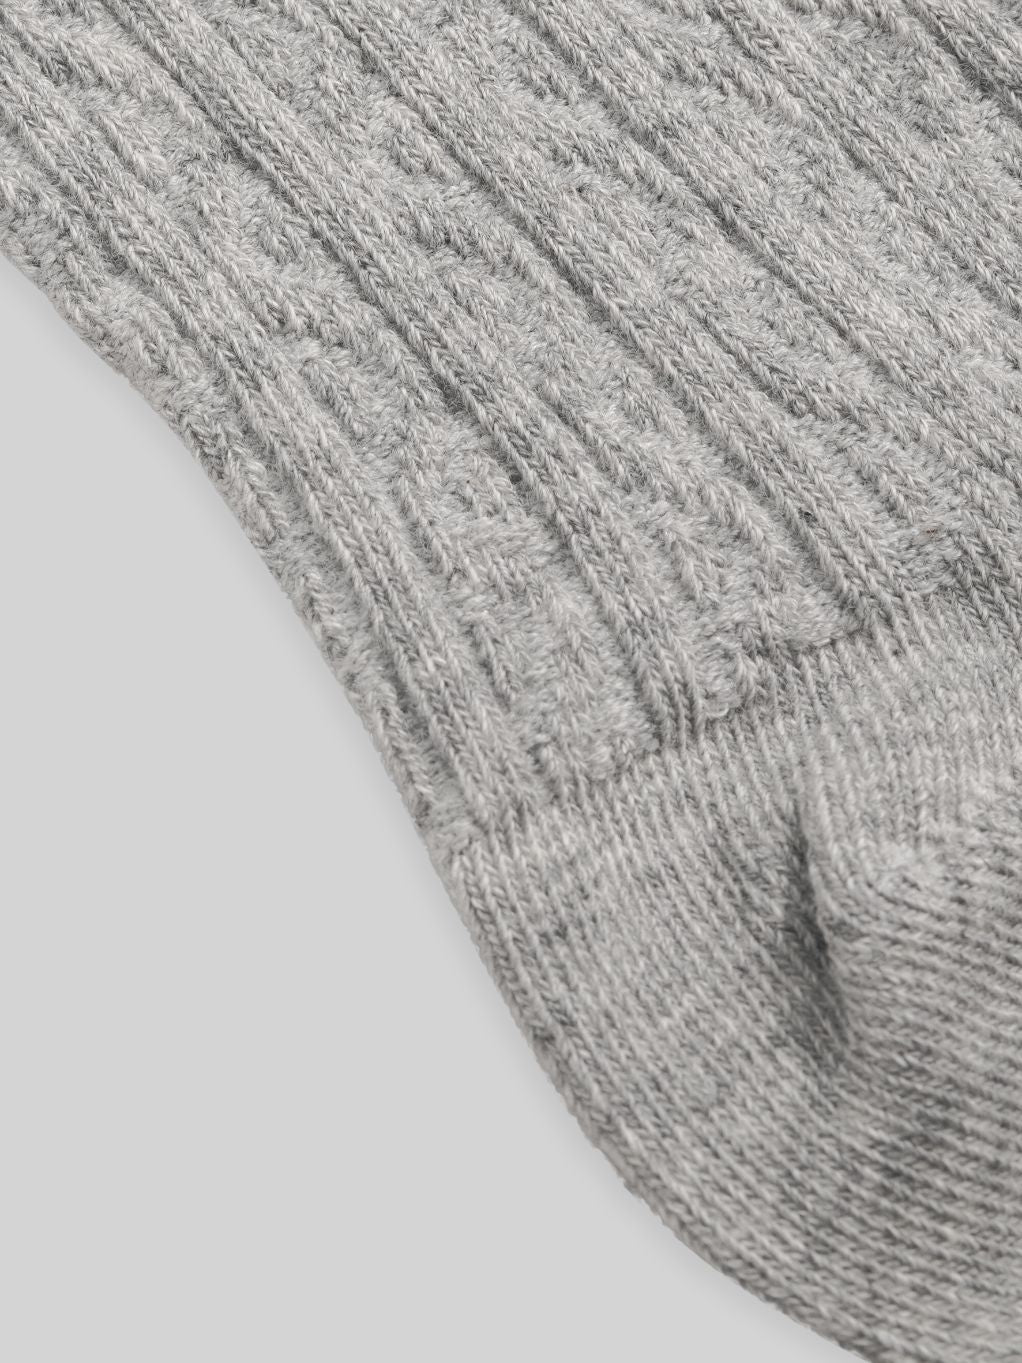 Textured No. 2 Cotton Knee-High Socks for Unisex